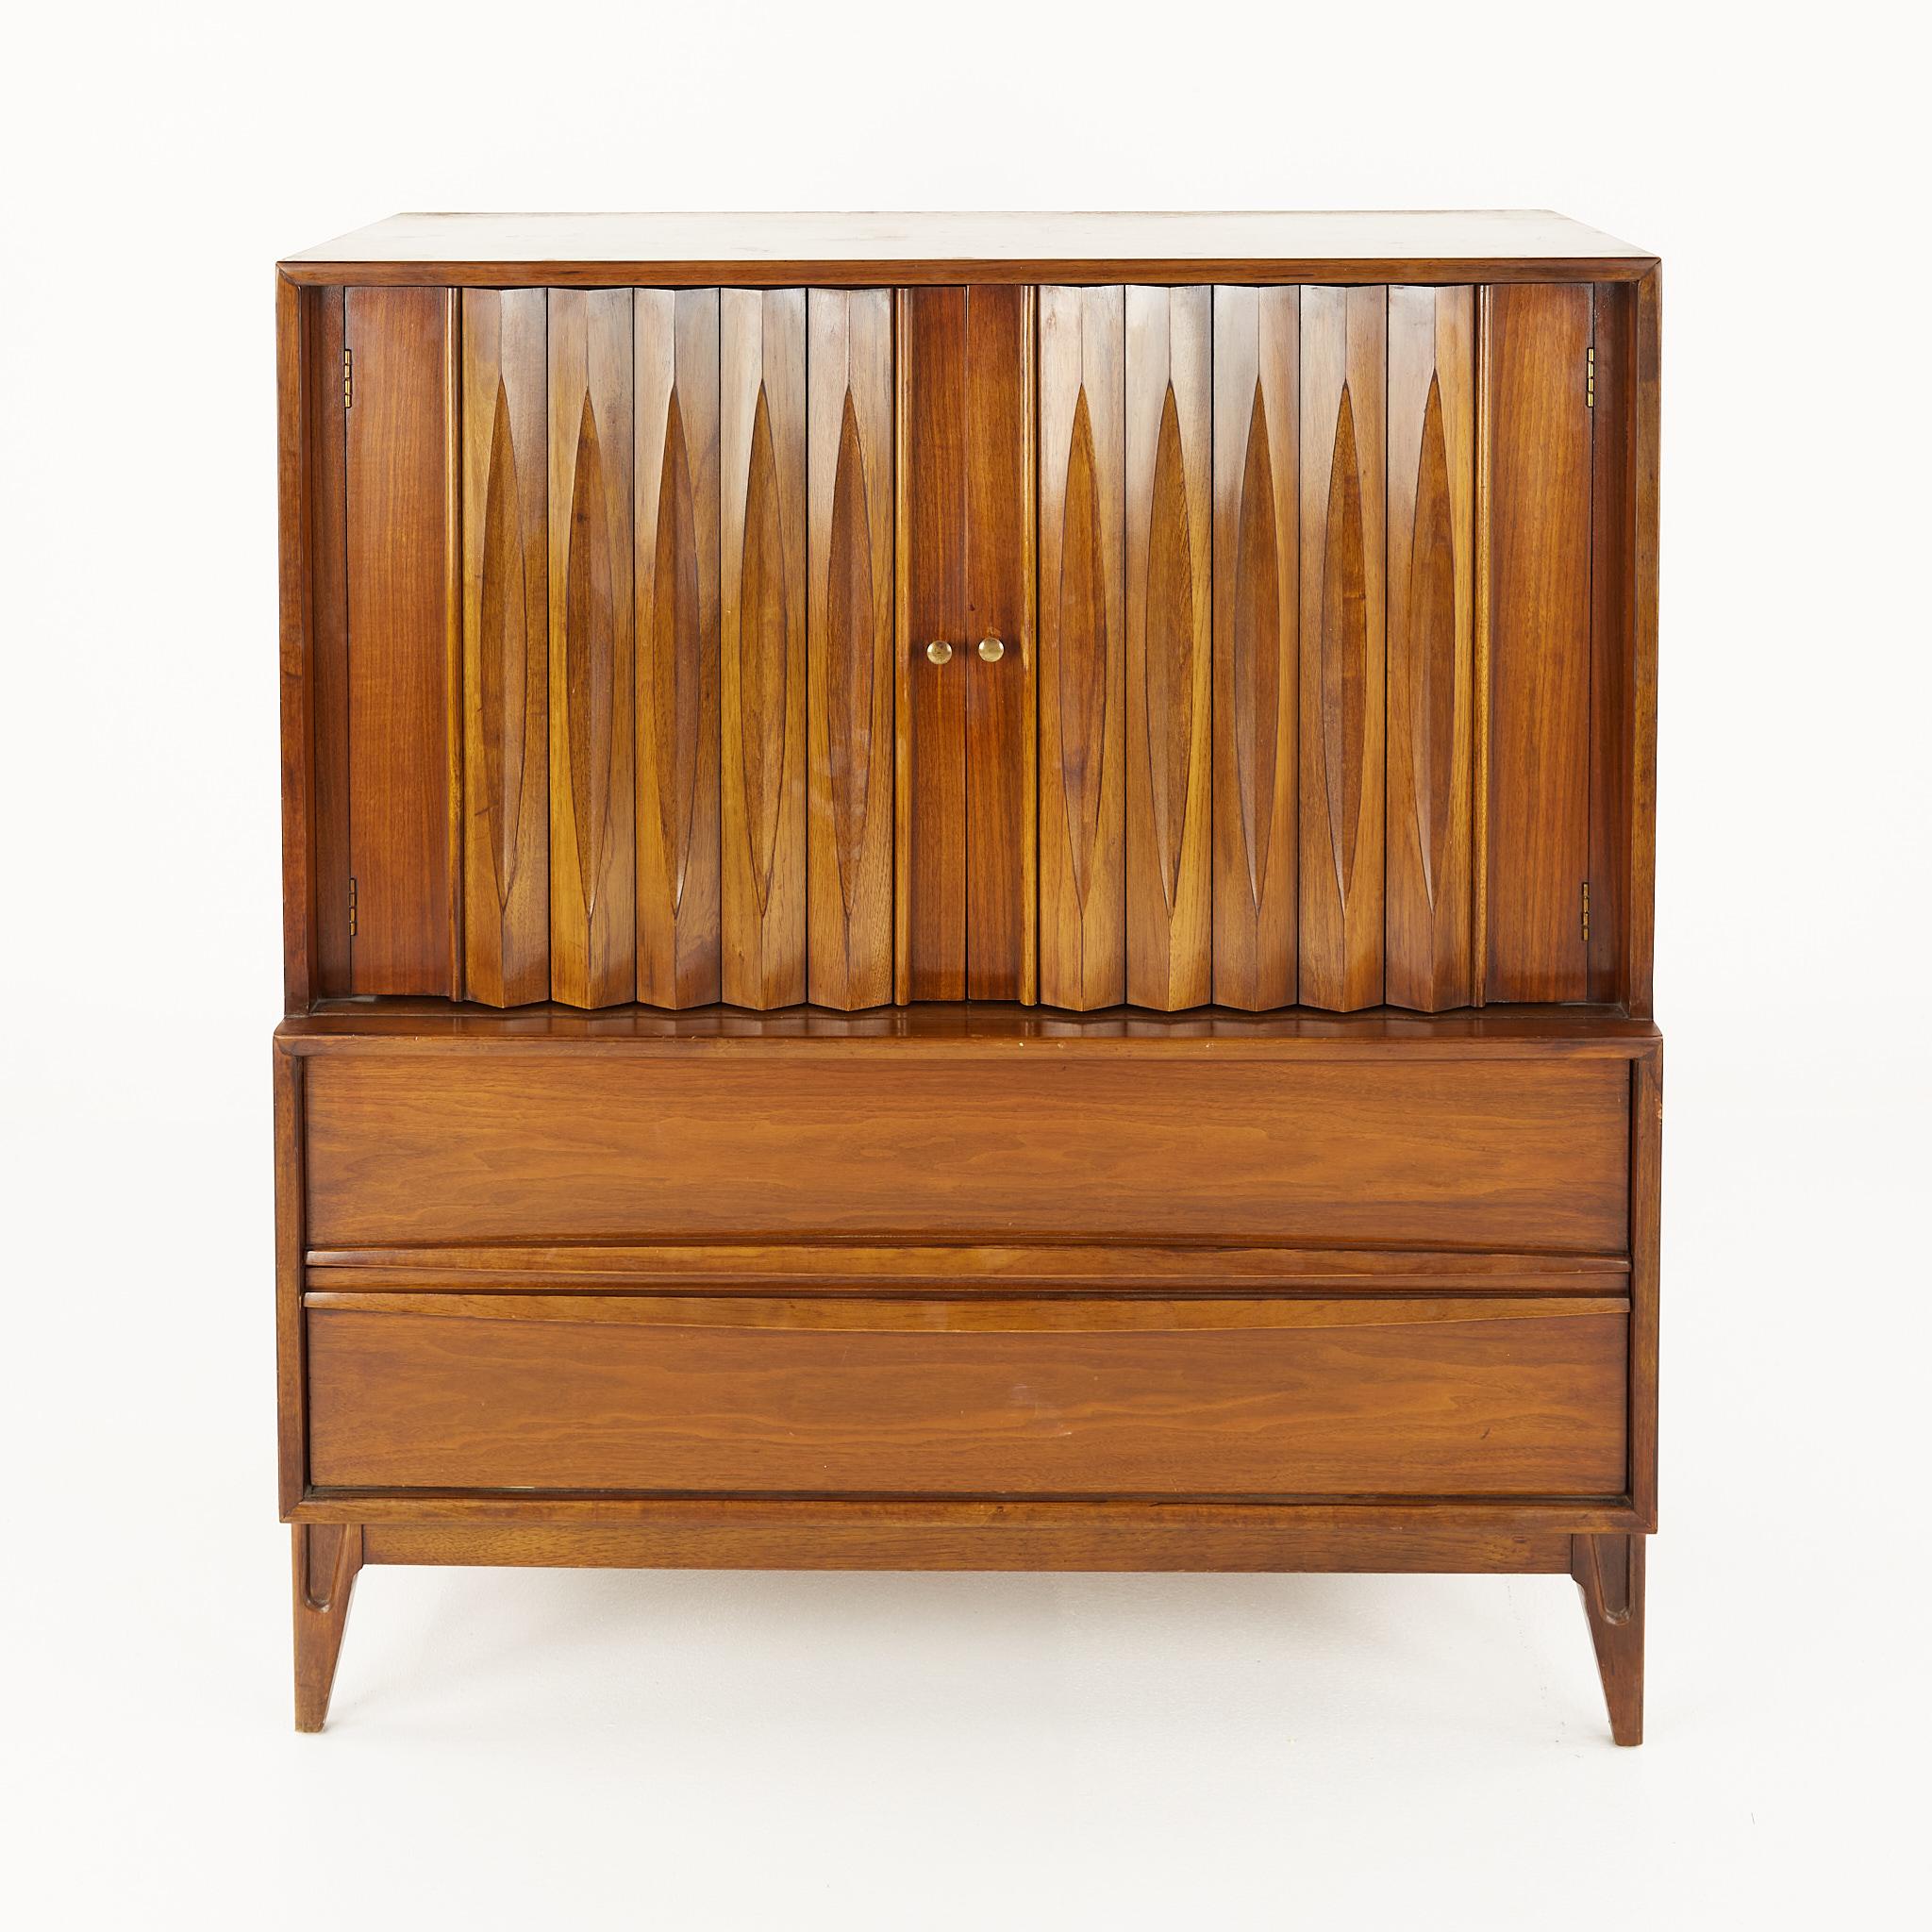 Thomasville Brutalist mid century walnut highboy dresser

This dresser measures: 41.5 wide x 18.5 deep x 45.5 inches high

?All pieces of furniture can be had in what we call restored vintage condition. That means the piece is restored upon